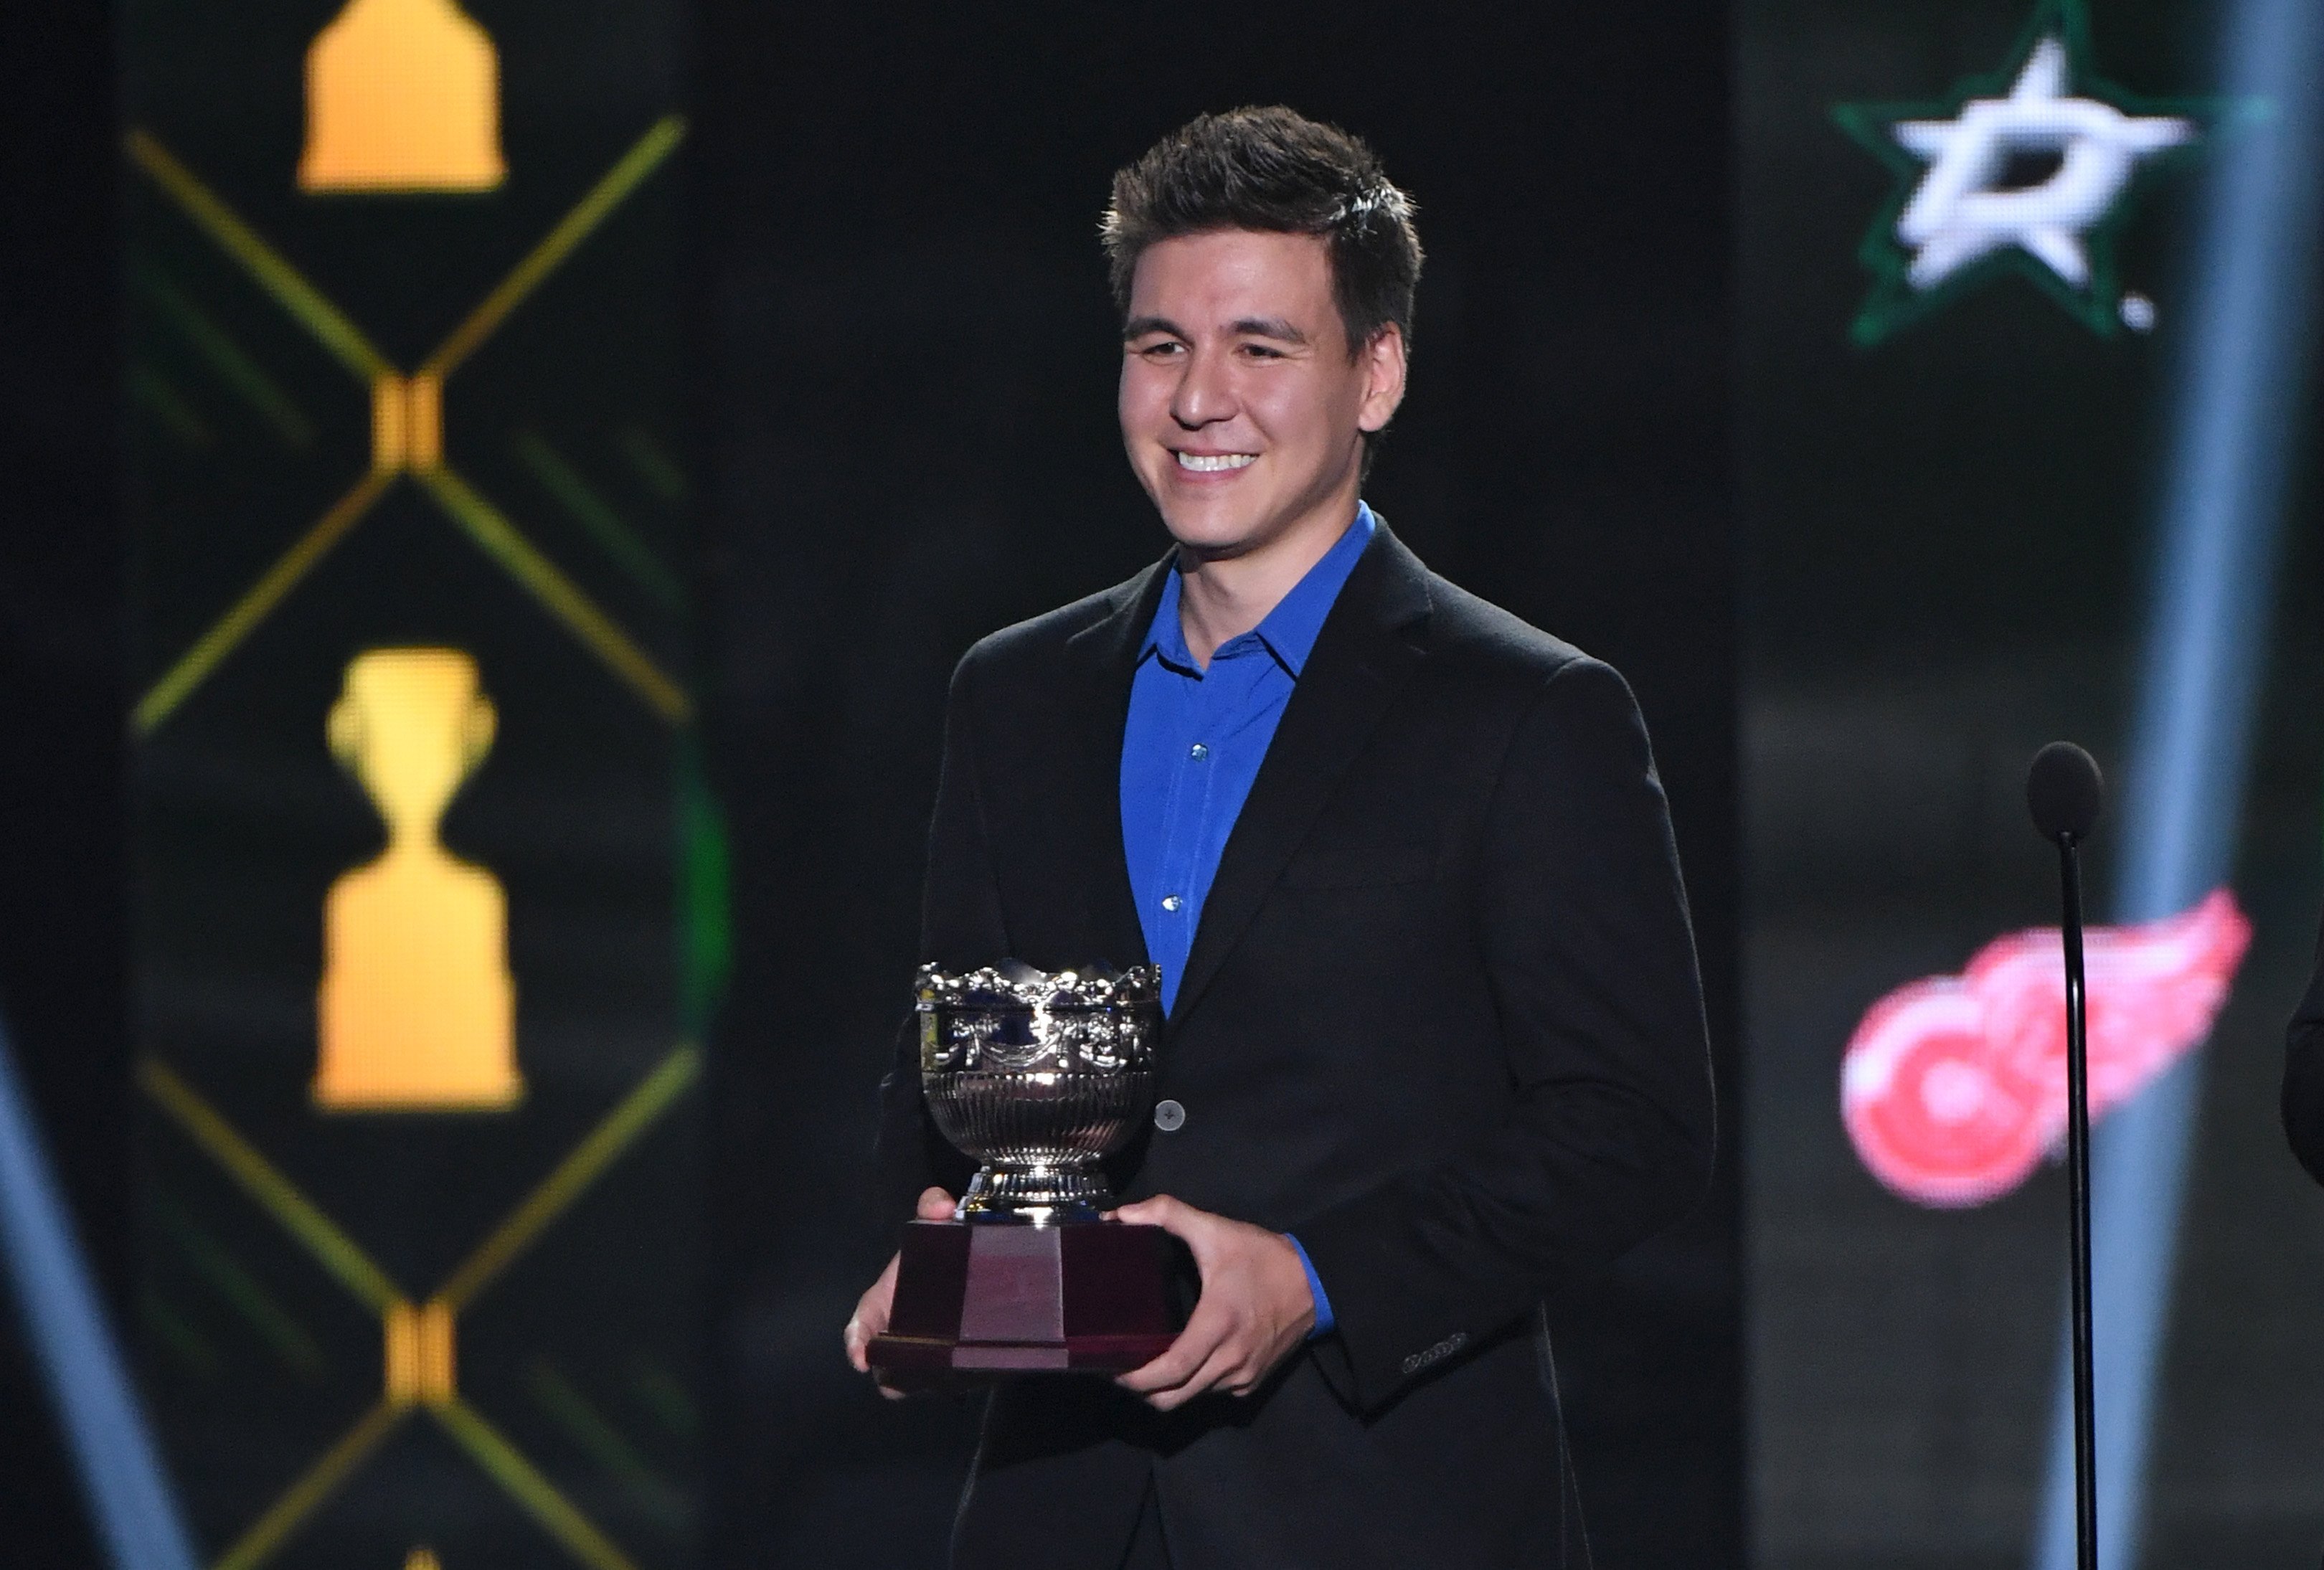 James Holzhauer presents the Frank J. Selke Trophy during the 2019 NHL Awards at the Mandalay Bay Events Center on June 19, 2019 in Las Vegas, Nevada | Photo: Getty Images